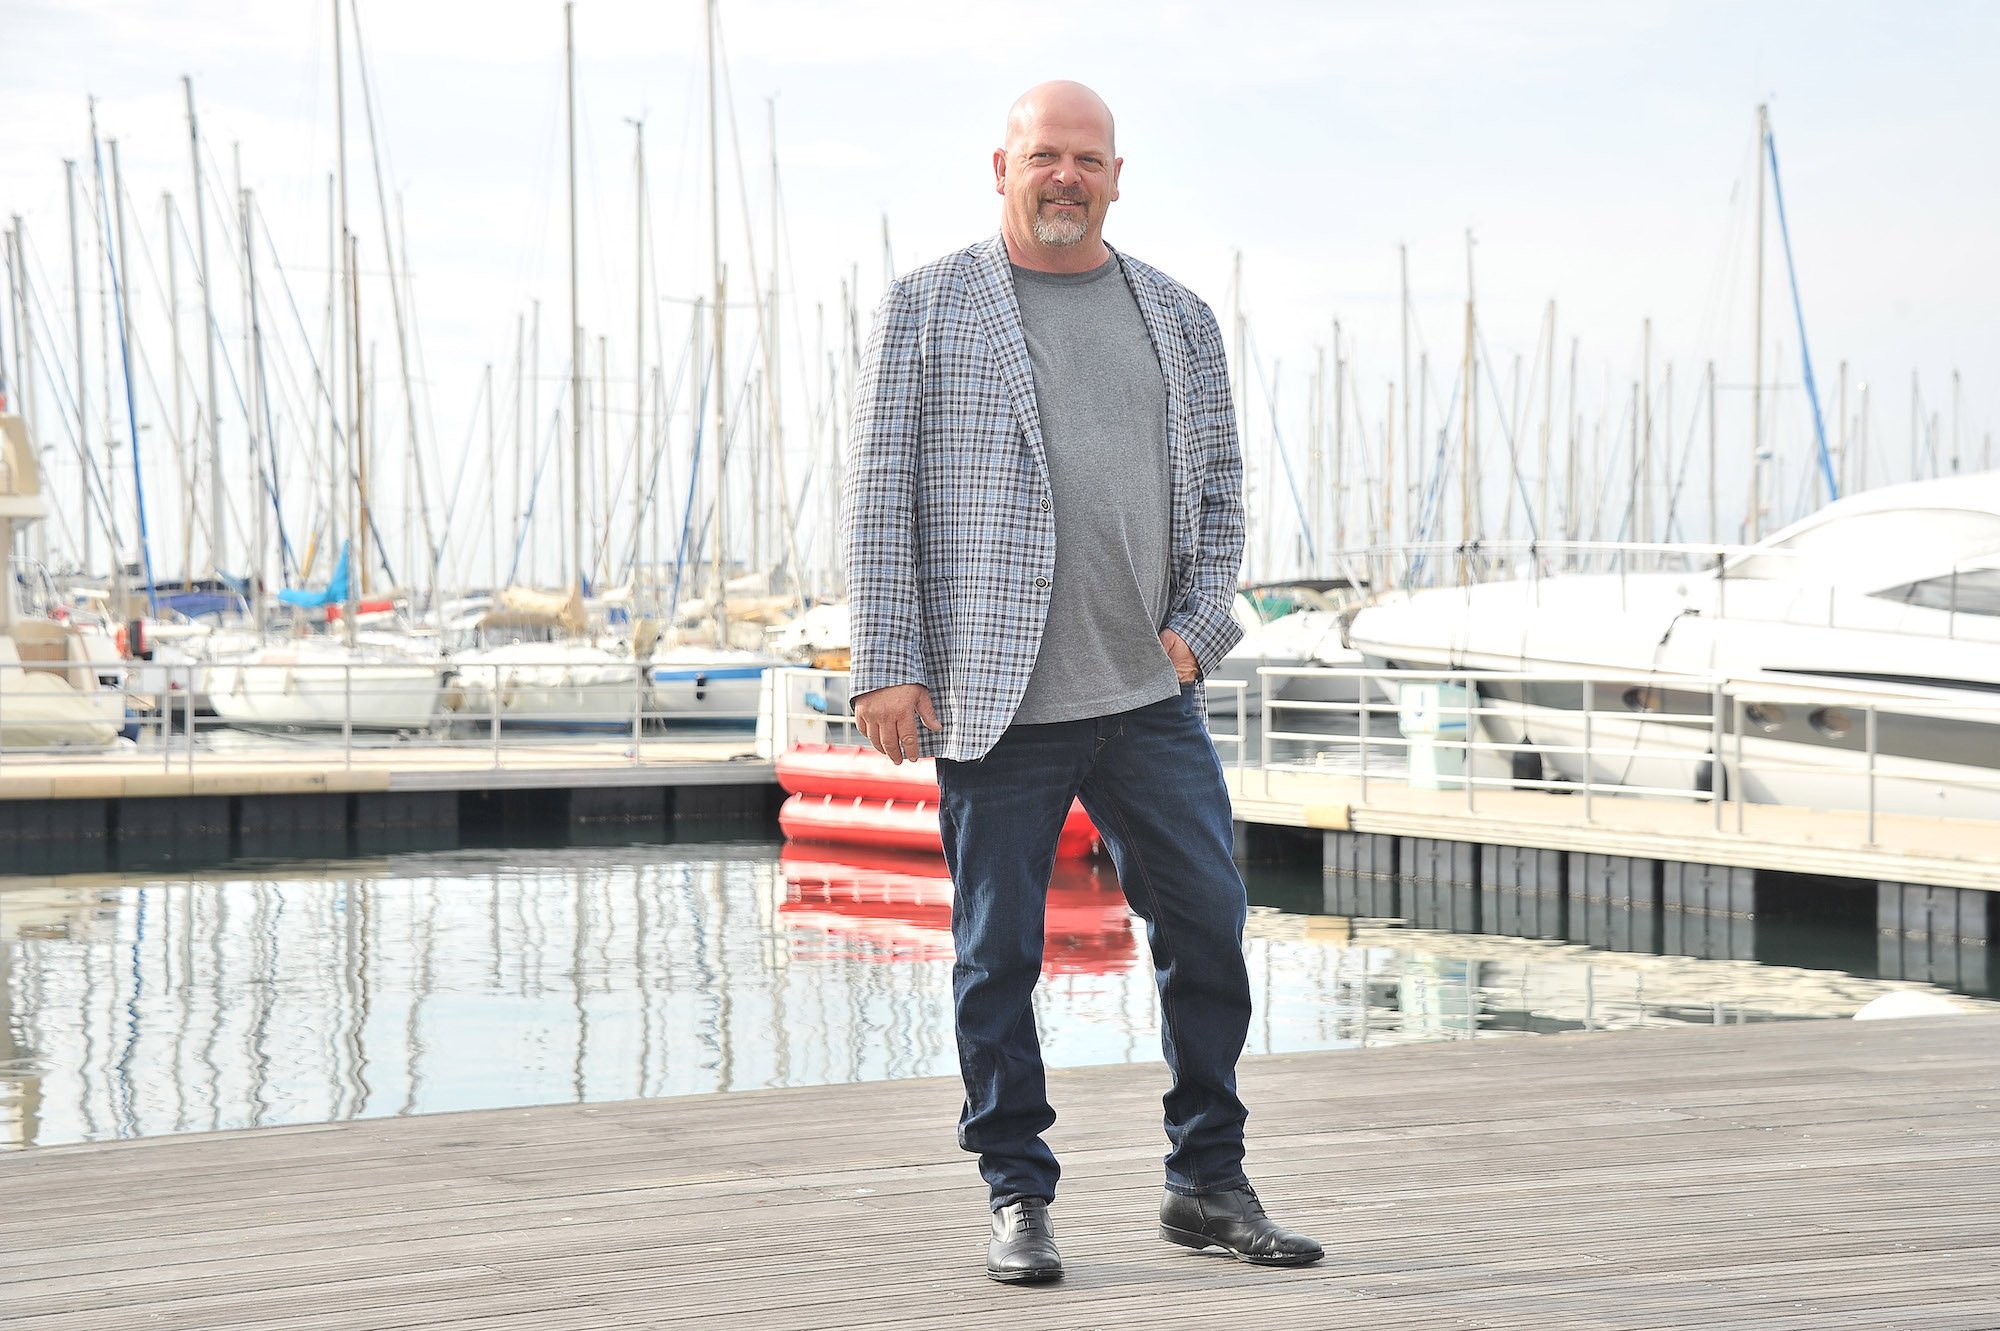 Rick Harrison smiling, standing on a dock in front of a marina